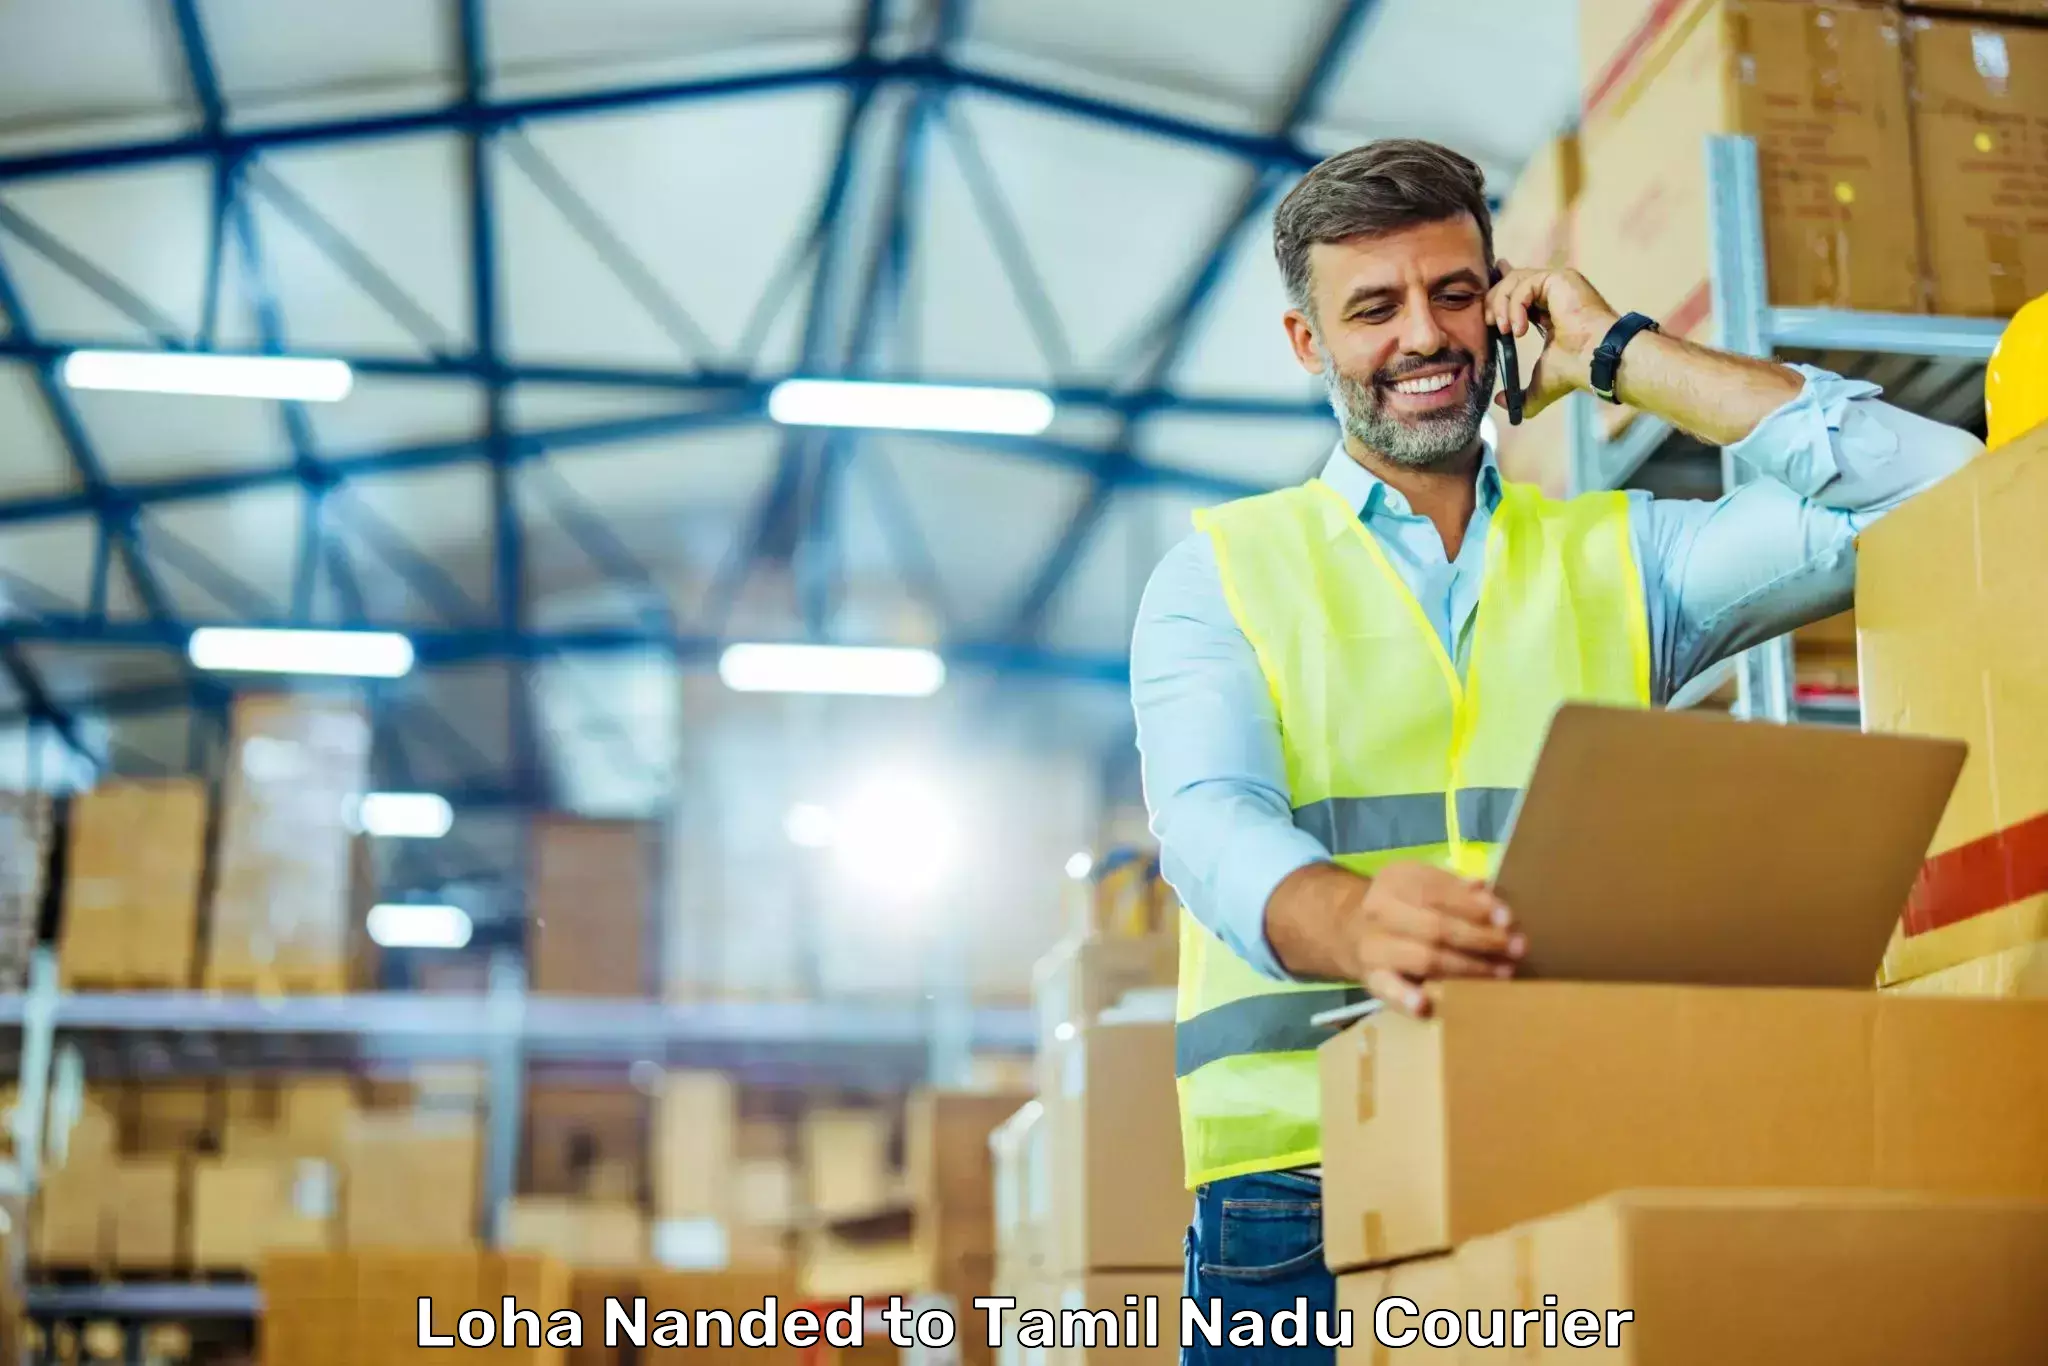 International courier networks Loha Nanded to Tallakulam